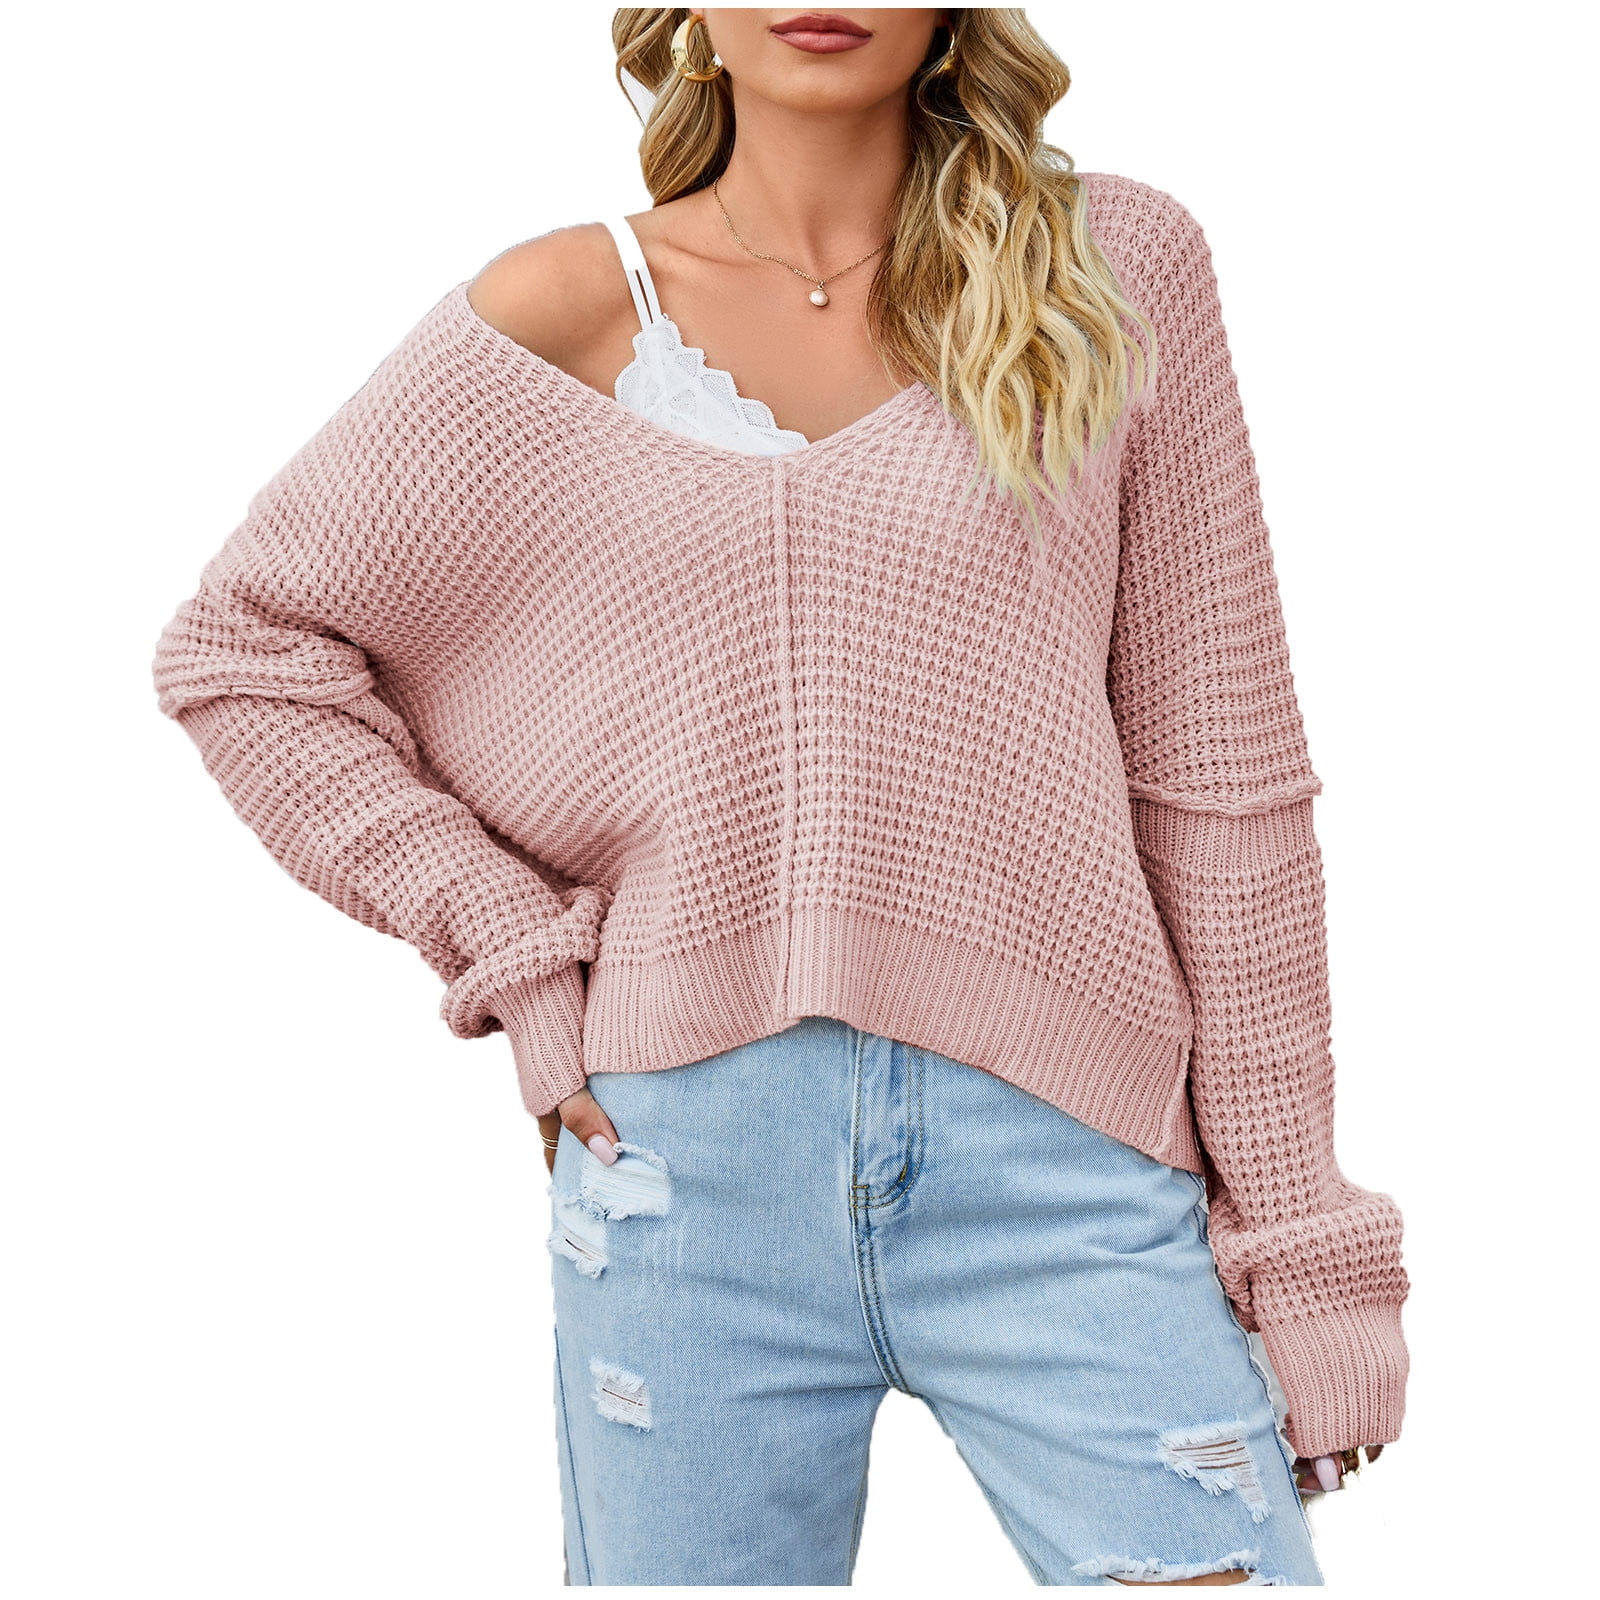 Yyeselk Waffle Knit Sweaters for Women Casual V Neck Solid Color Oversized  Drop Shoulder Long Sleeve Comfy Relaxed Fit Crop Pullover Sweater Tops